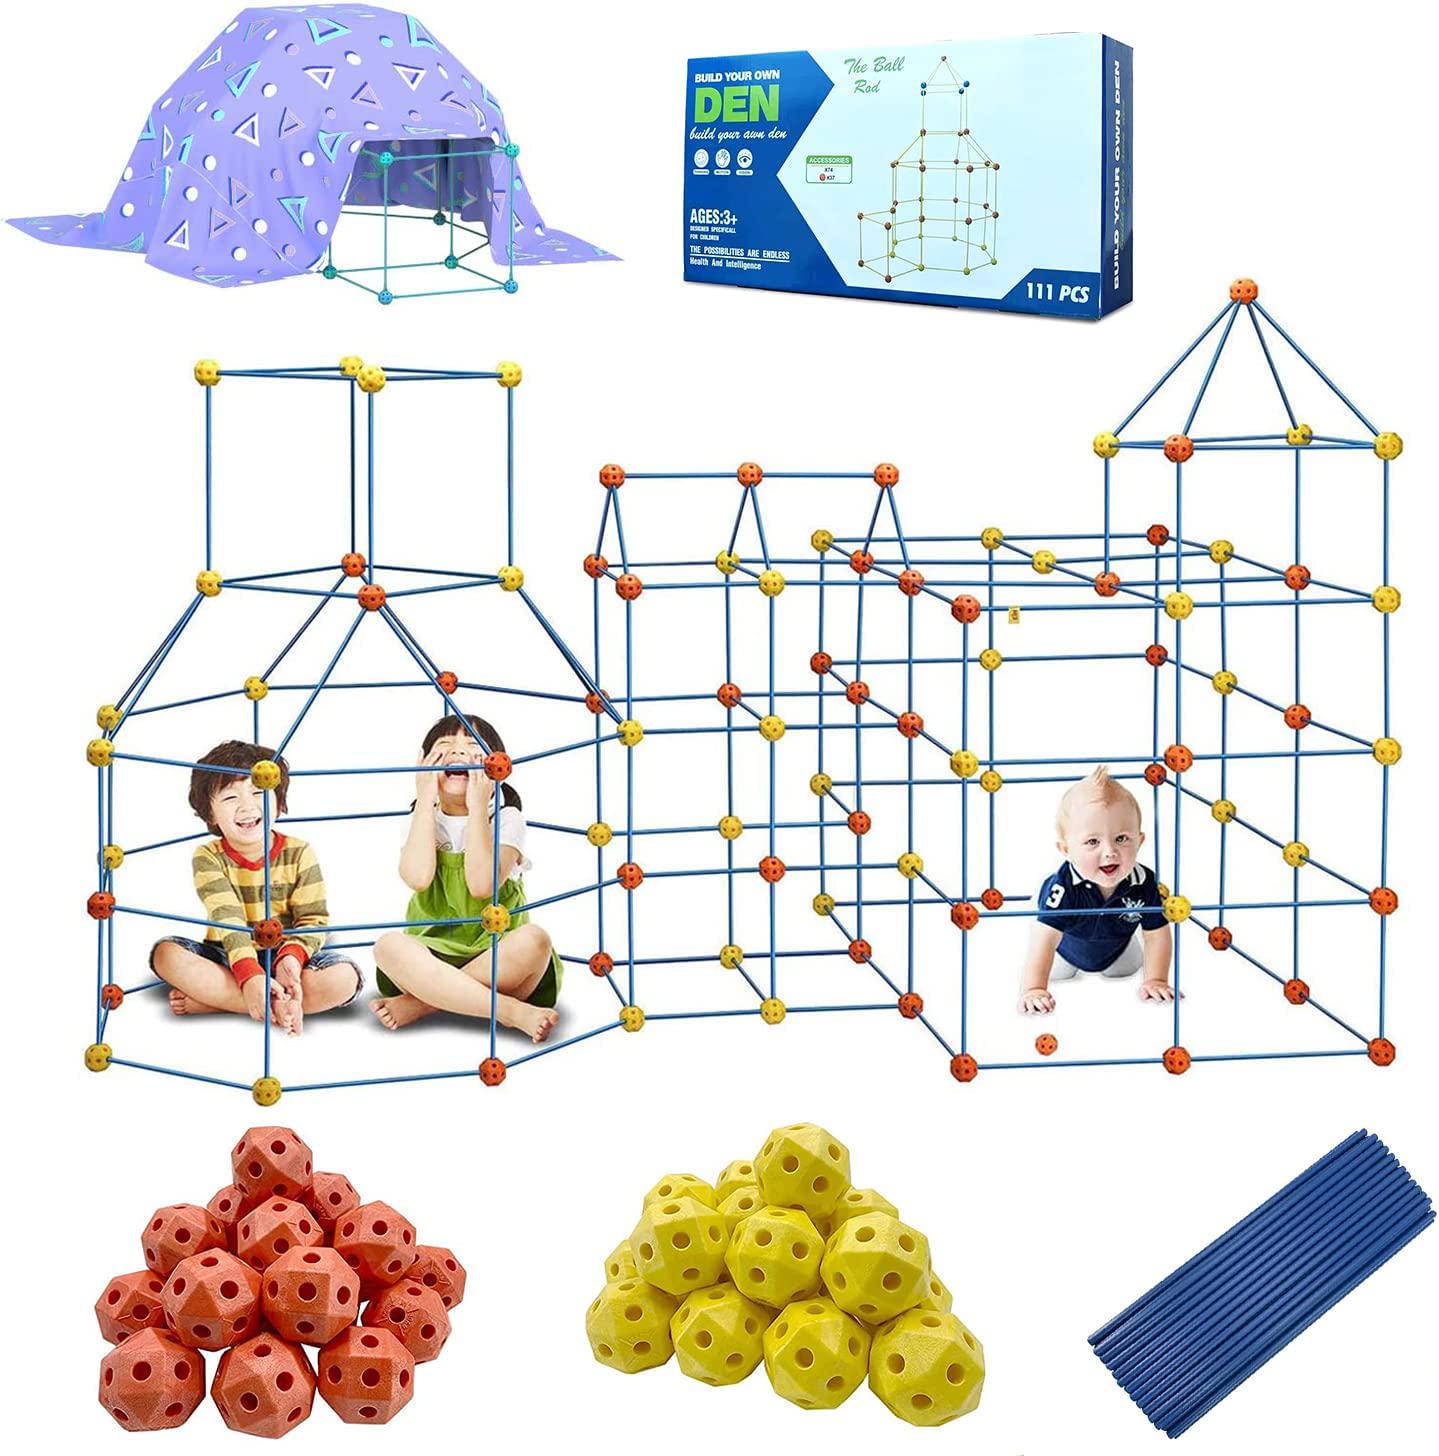 BOAODOO, Kids Fort Building Kit 111 Pieces Construction STEM Toys for 5 6 7 8 9 10 11 12 Years Old Boys and Girls Ultimate Forts Builder Gift Build DIY Educational Learning Toy for Indoor and Outdoor (111PCS)